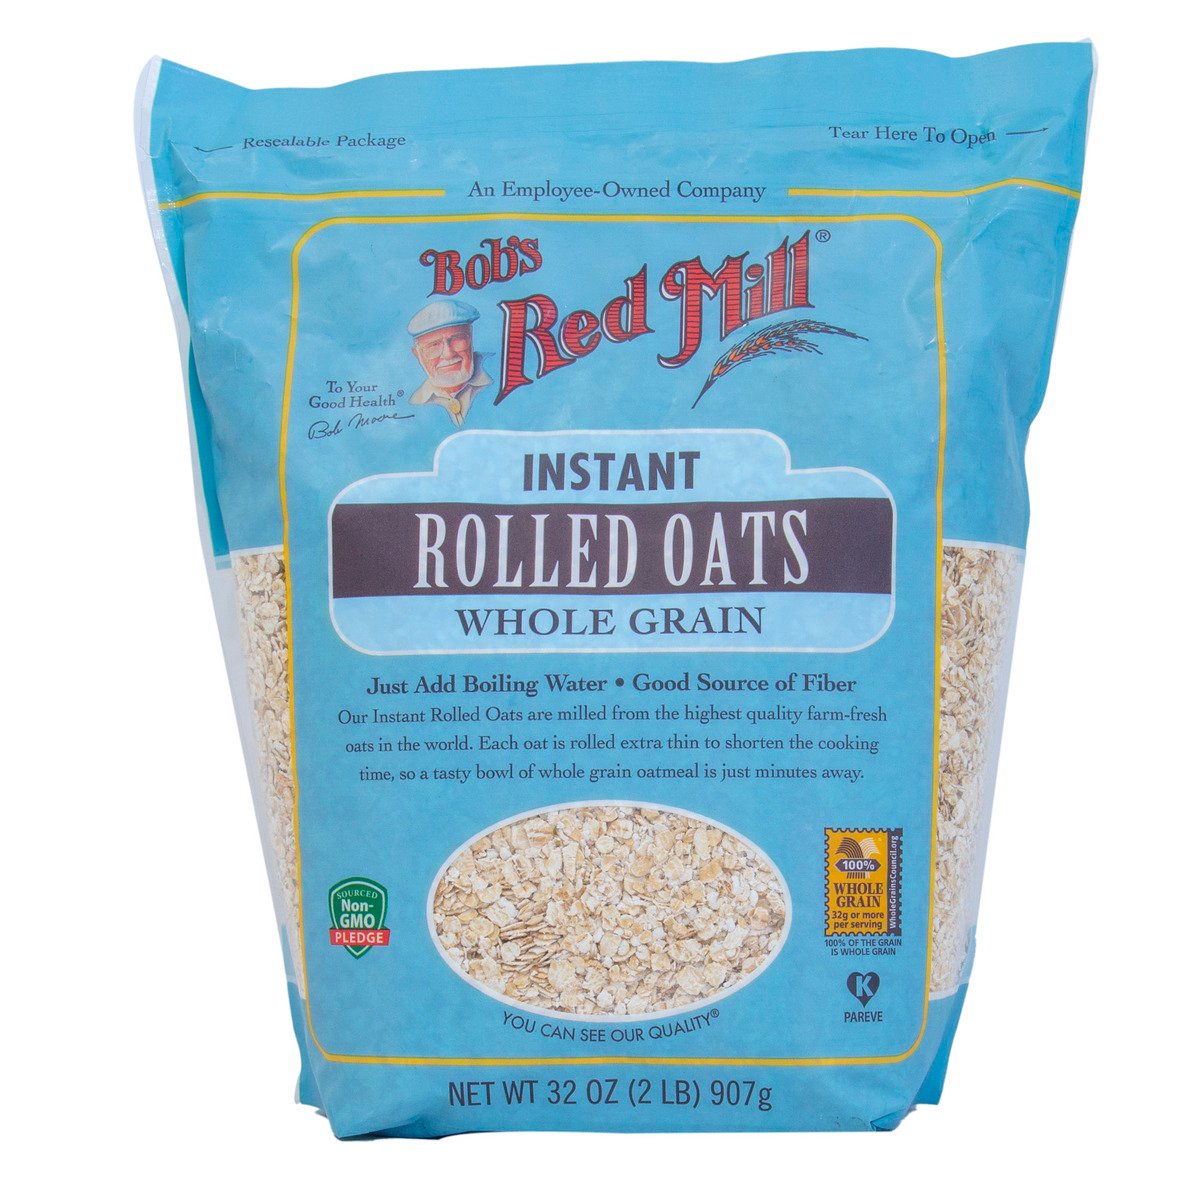 Bob's Red Mill Instant Rolled Oats Whole Grain 907 g